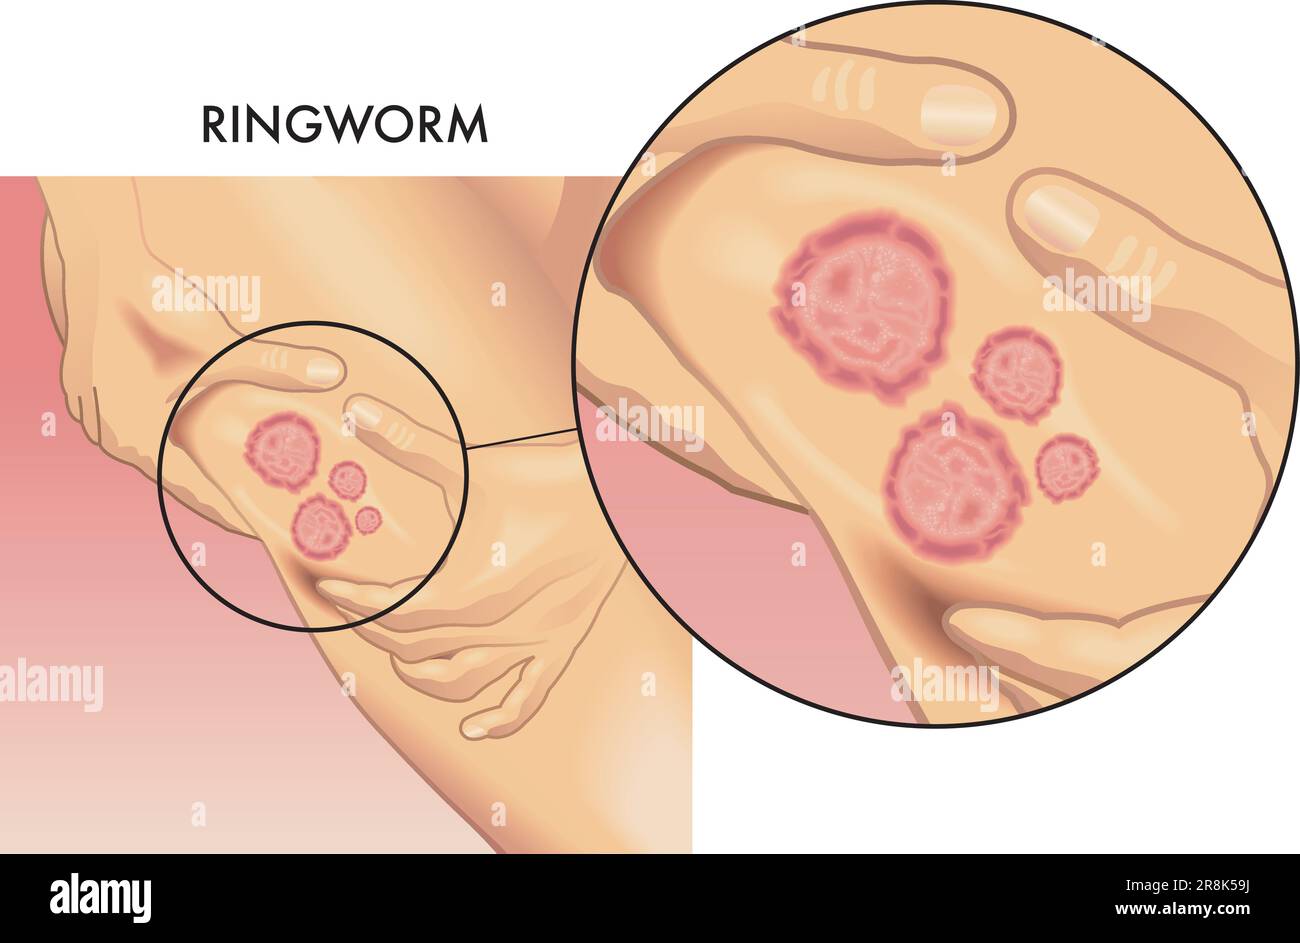 Medical illustration of a female leg affected by ringworm, with magnified detail. Stock Vector